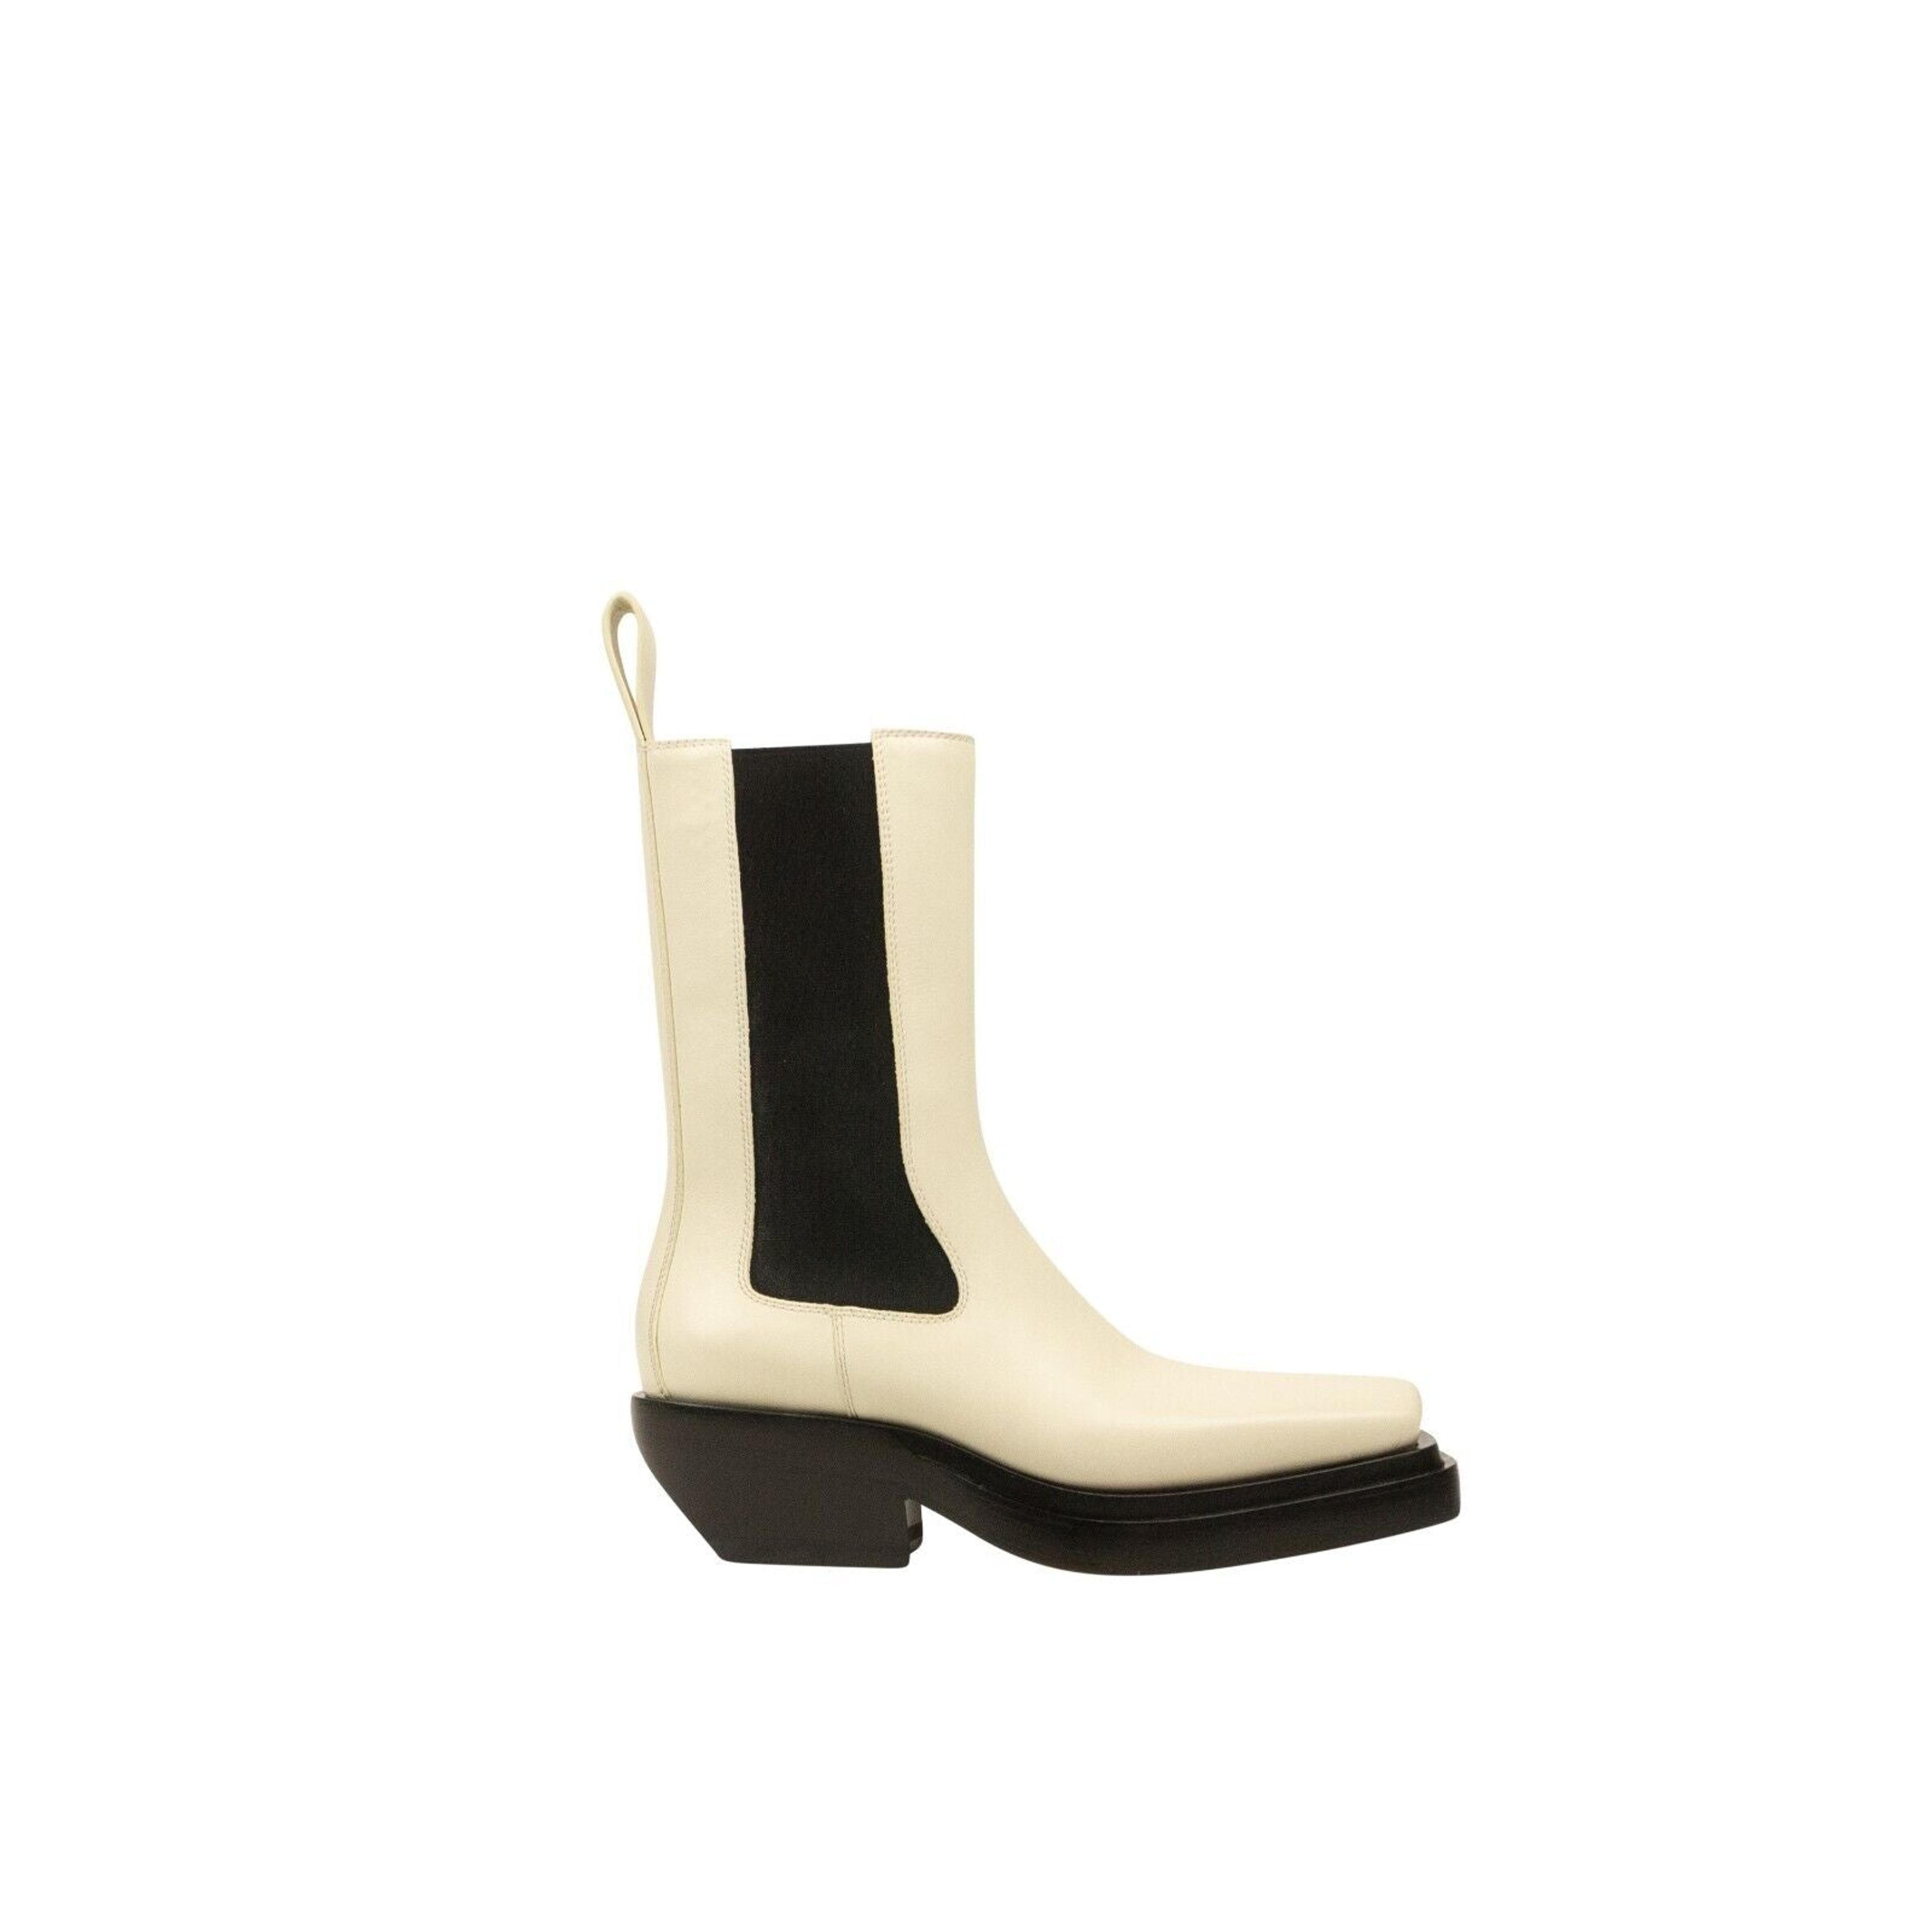 Ivory Lean Heeled Chelsea Boots